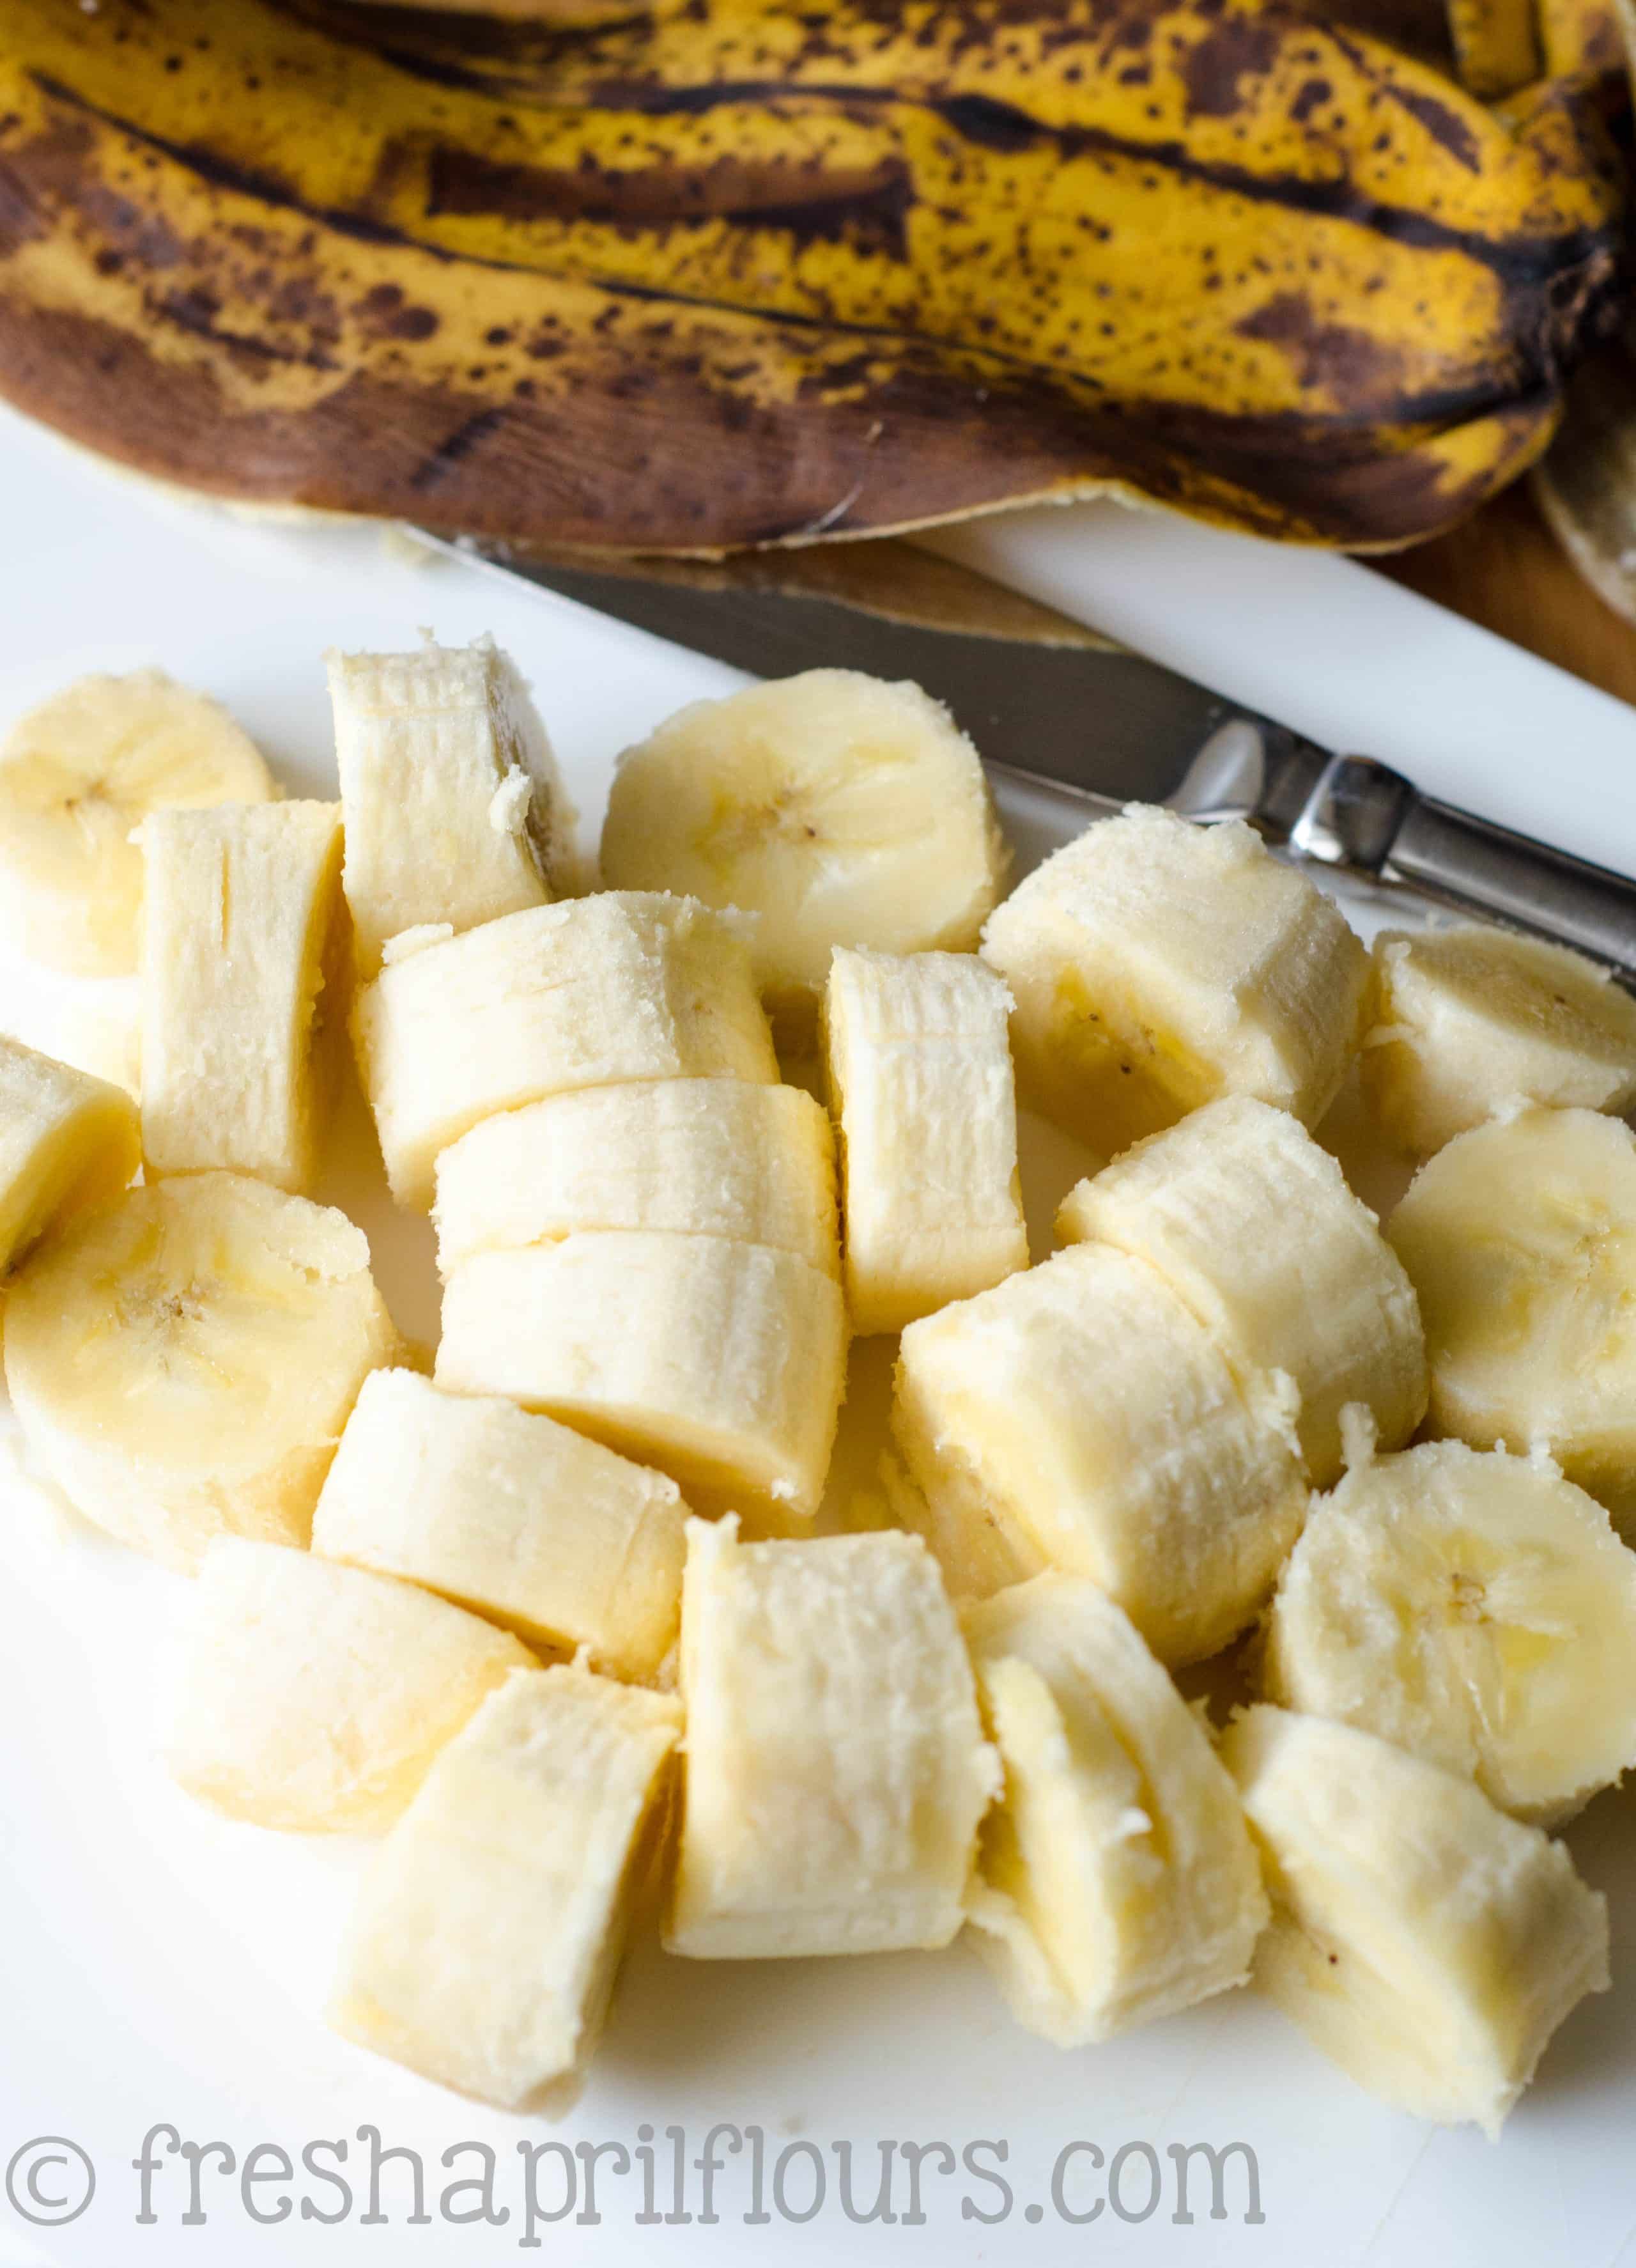 very brown banana cut into slices